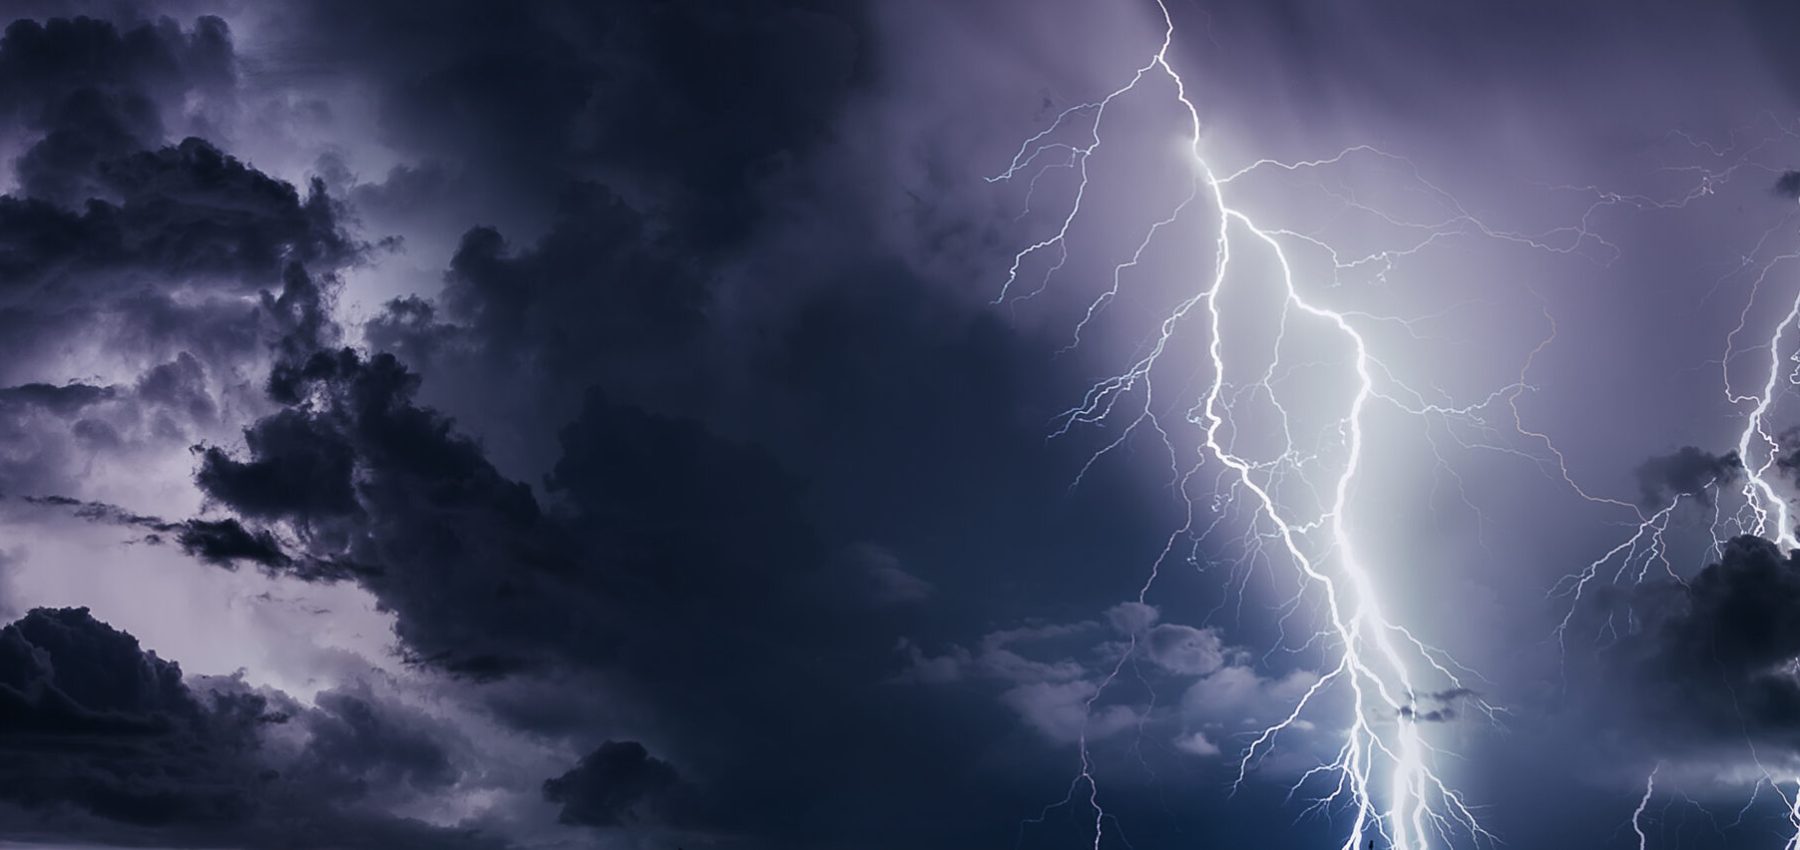 Beautiful thunderstorm with lightning bolts, banner image